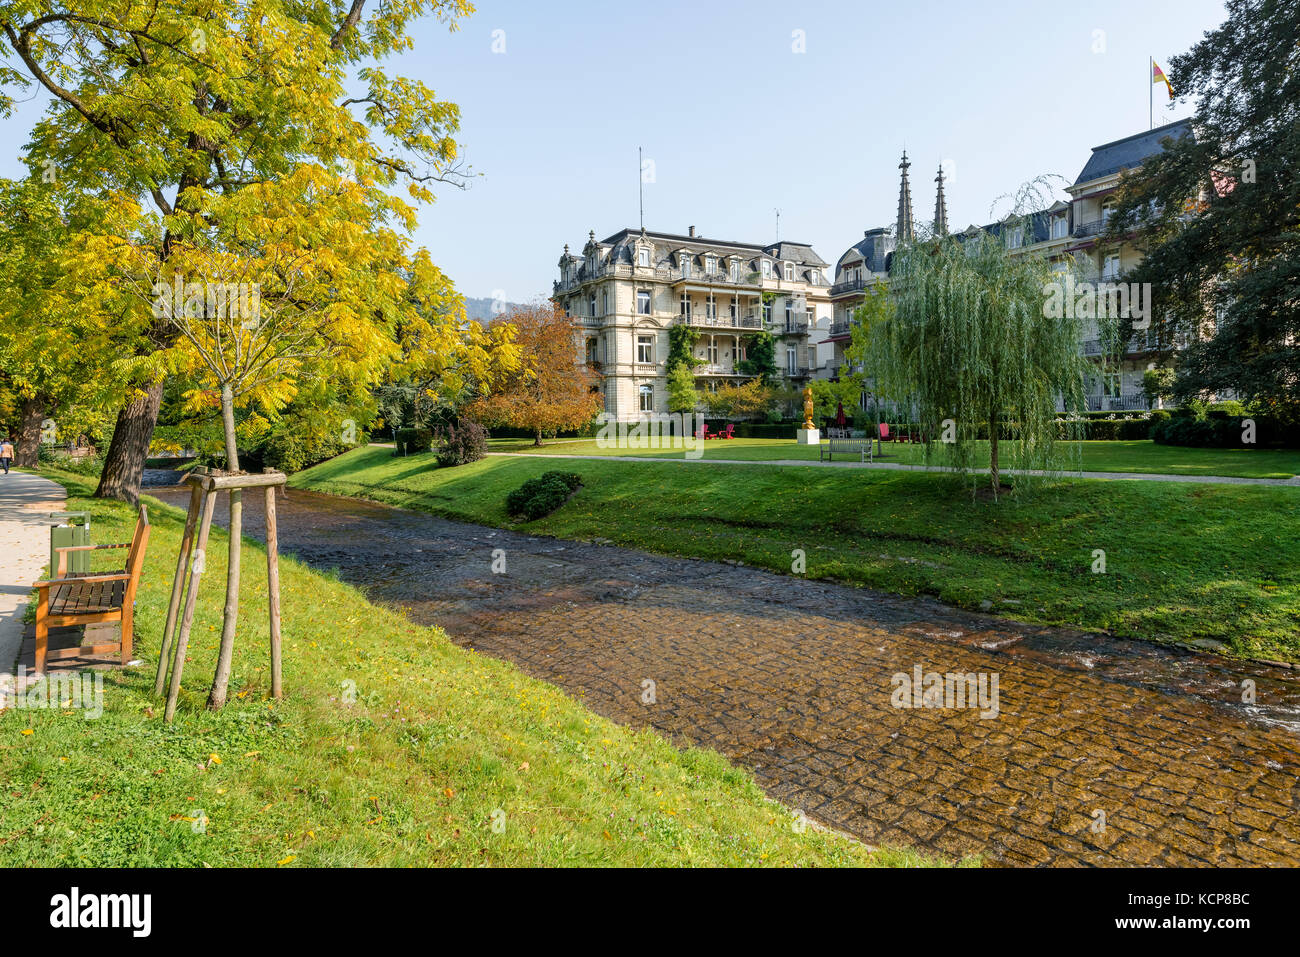 world famous hotel Brenners Parkhotel at the river Oos, spa park and arboretum at the Lichtentaler Allee in Baden-Baden, Black Forest, Germany Stock Photo